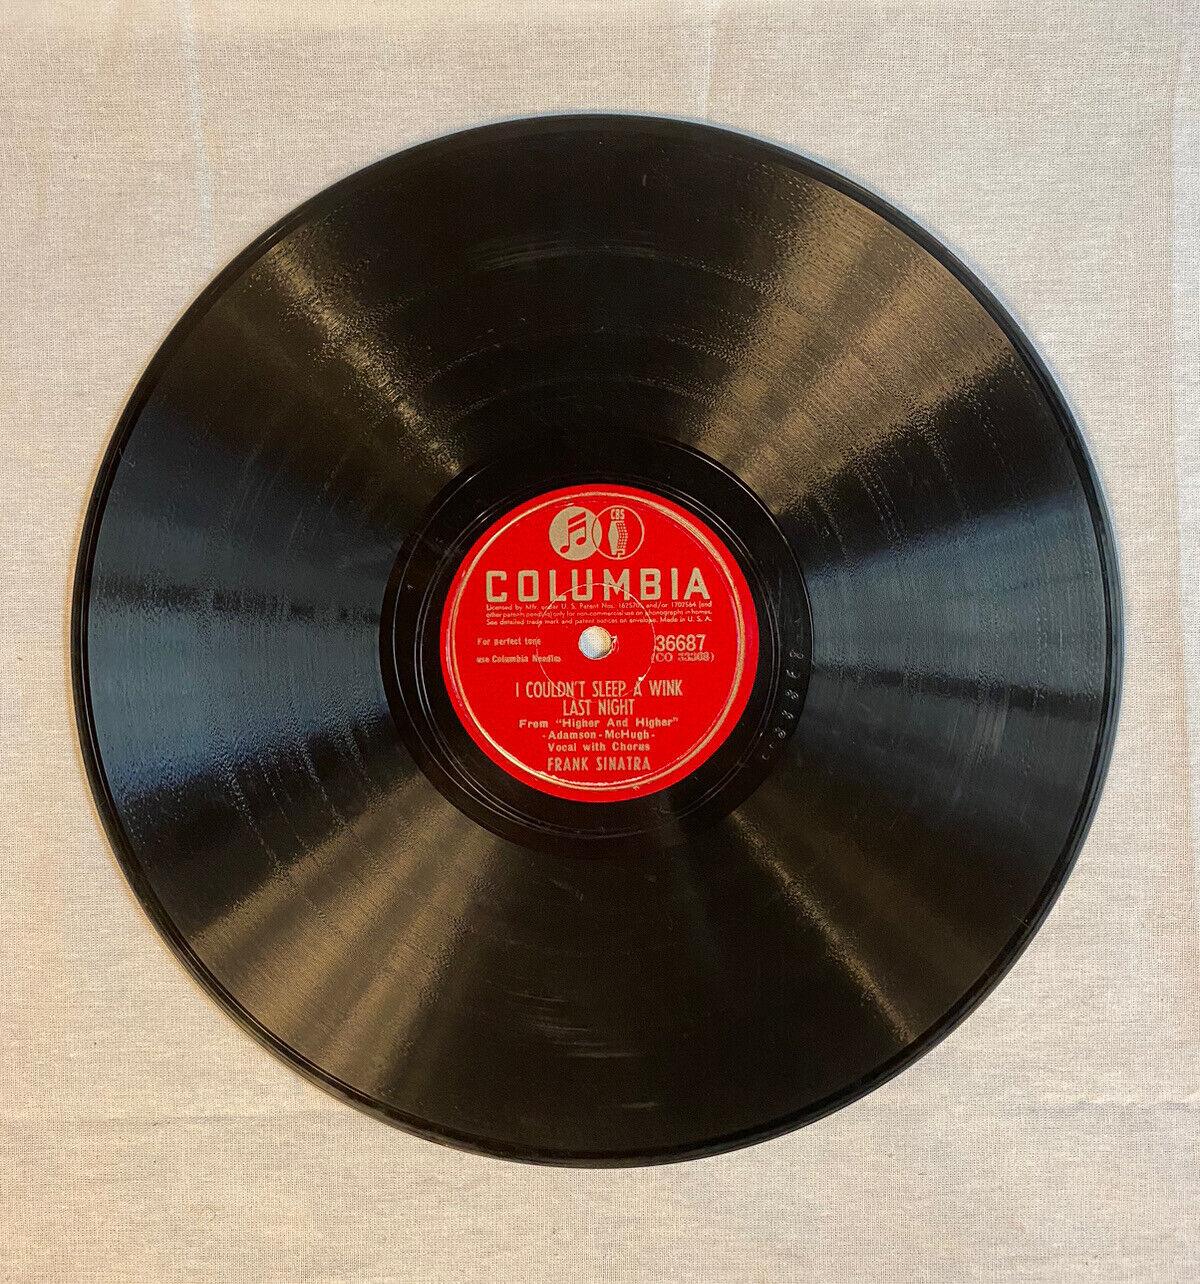 Vintage Columbia Frank Sinatra 78 RPM Record • A Lovely Way To Spend An Evening